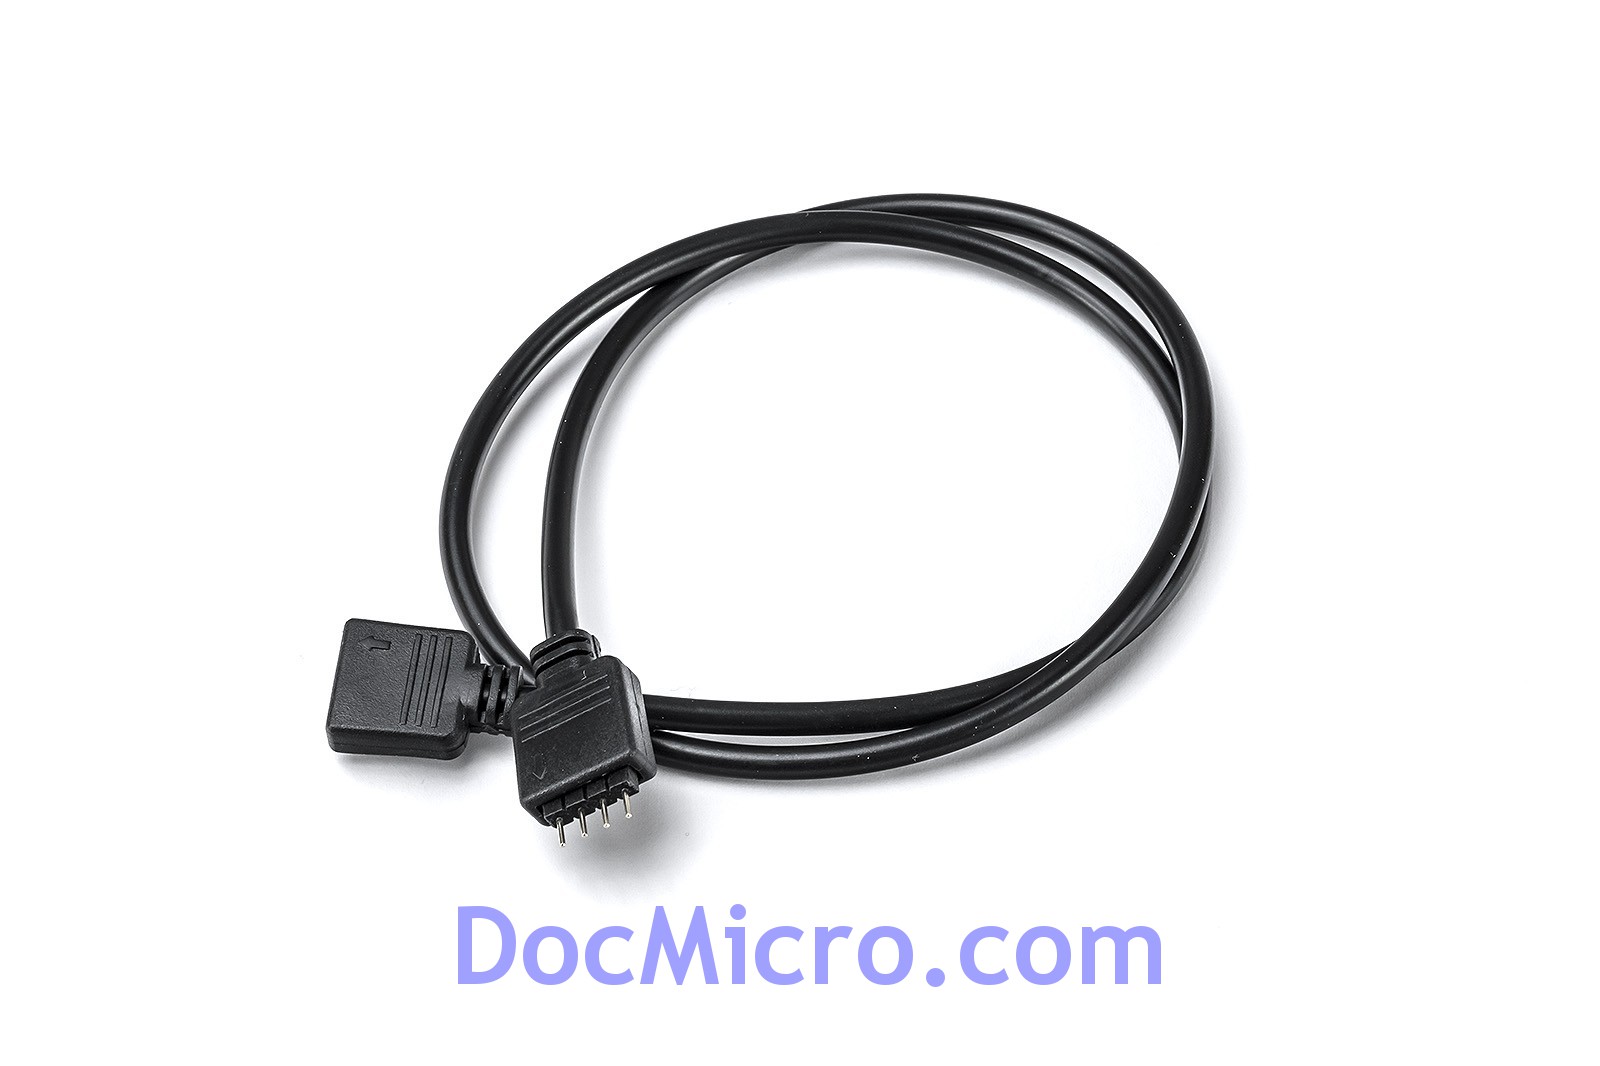 https://www.docmicro.com/images/products/tag/ek_rgb_extention_cable_510cm.jpg